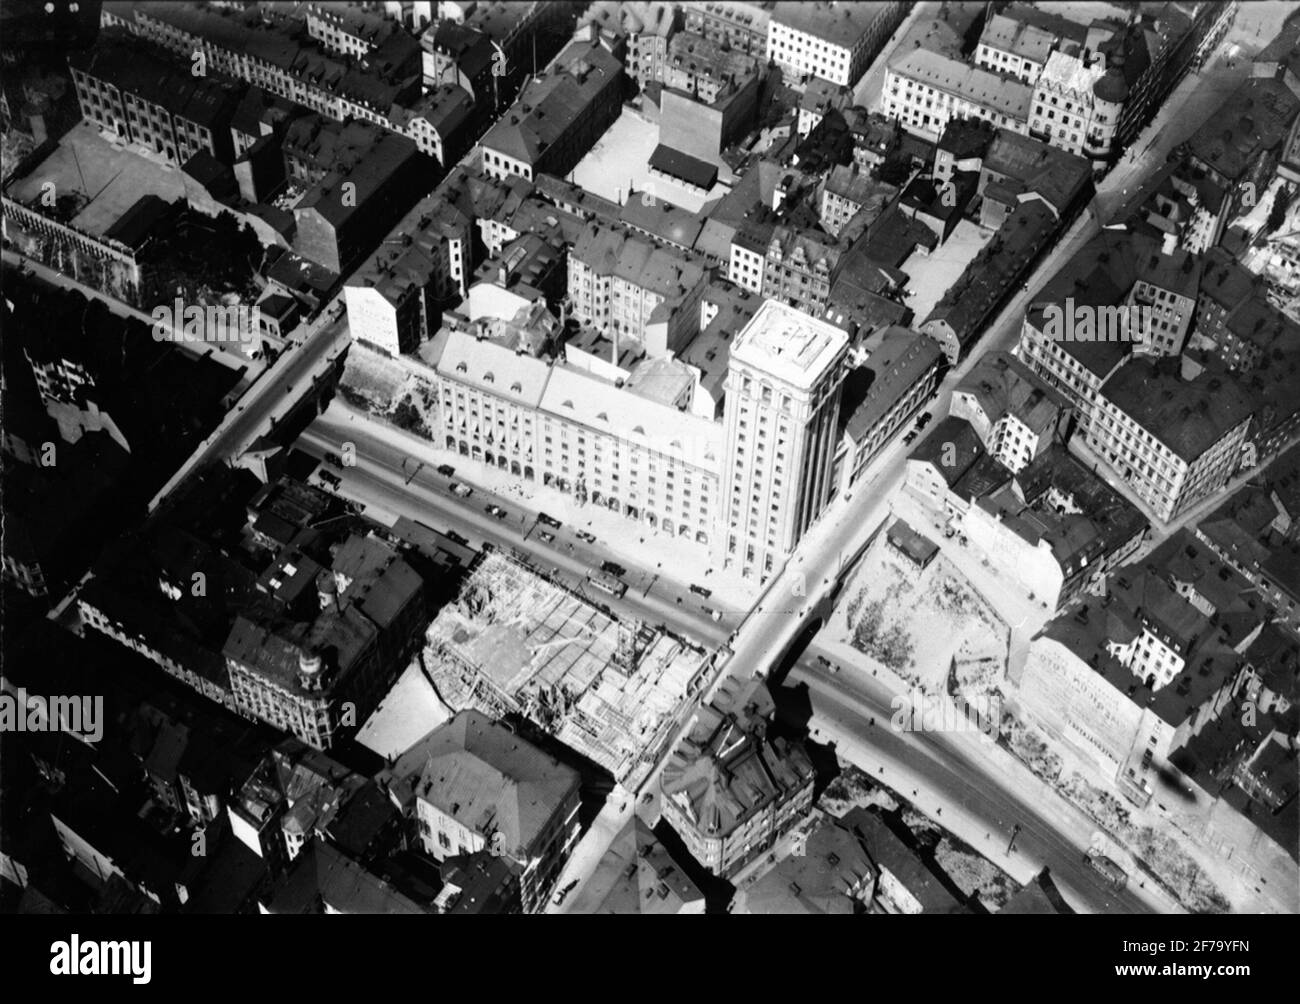 Builder: Building company Contractor, Stockholm. Aerial image. Kungsgatan 28 and Northern King Tower. Most plots at Kungsgatan are still undeveloped. For the Southern King Tower, the works have just begun. Stock Photo